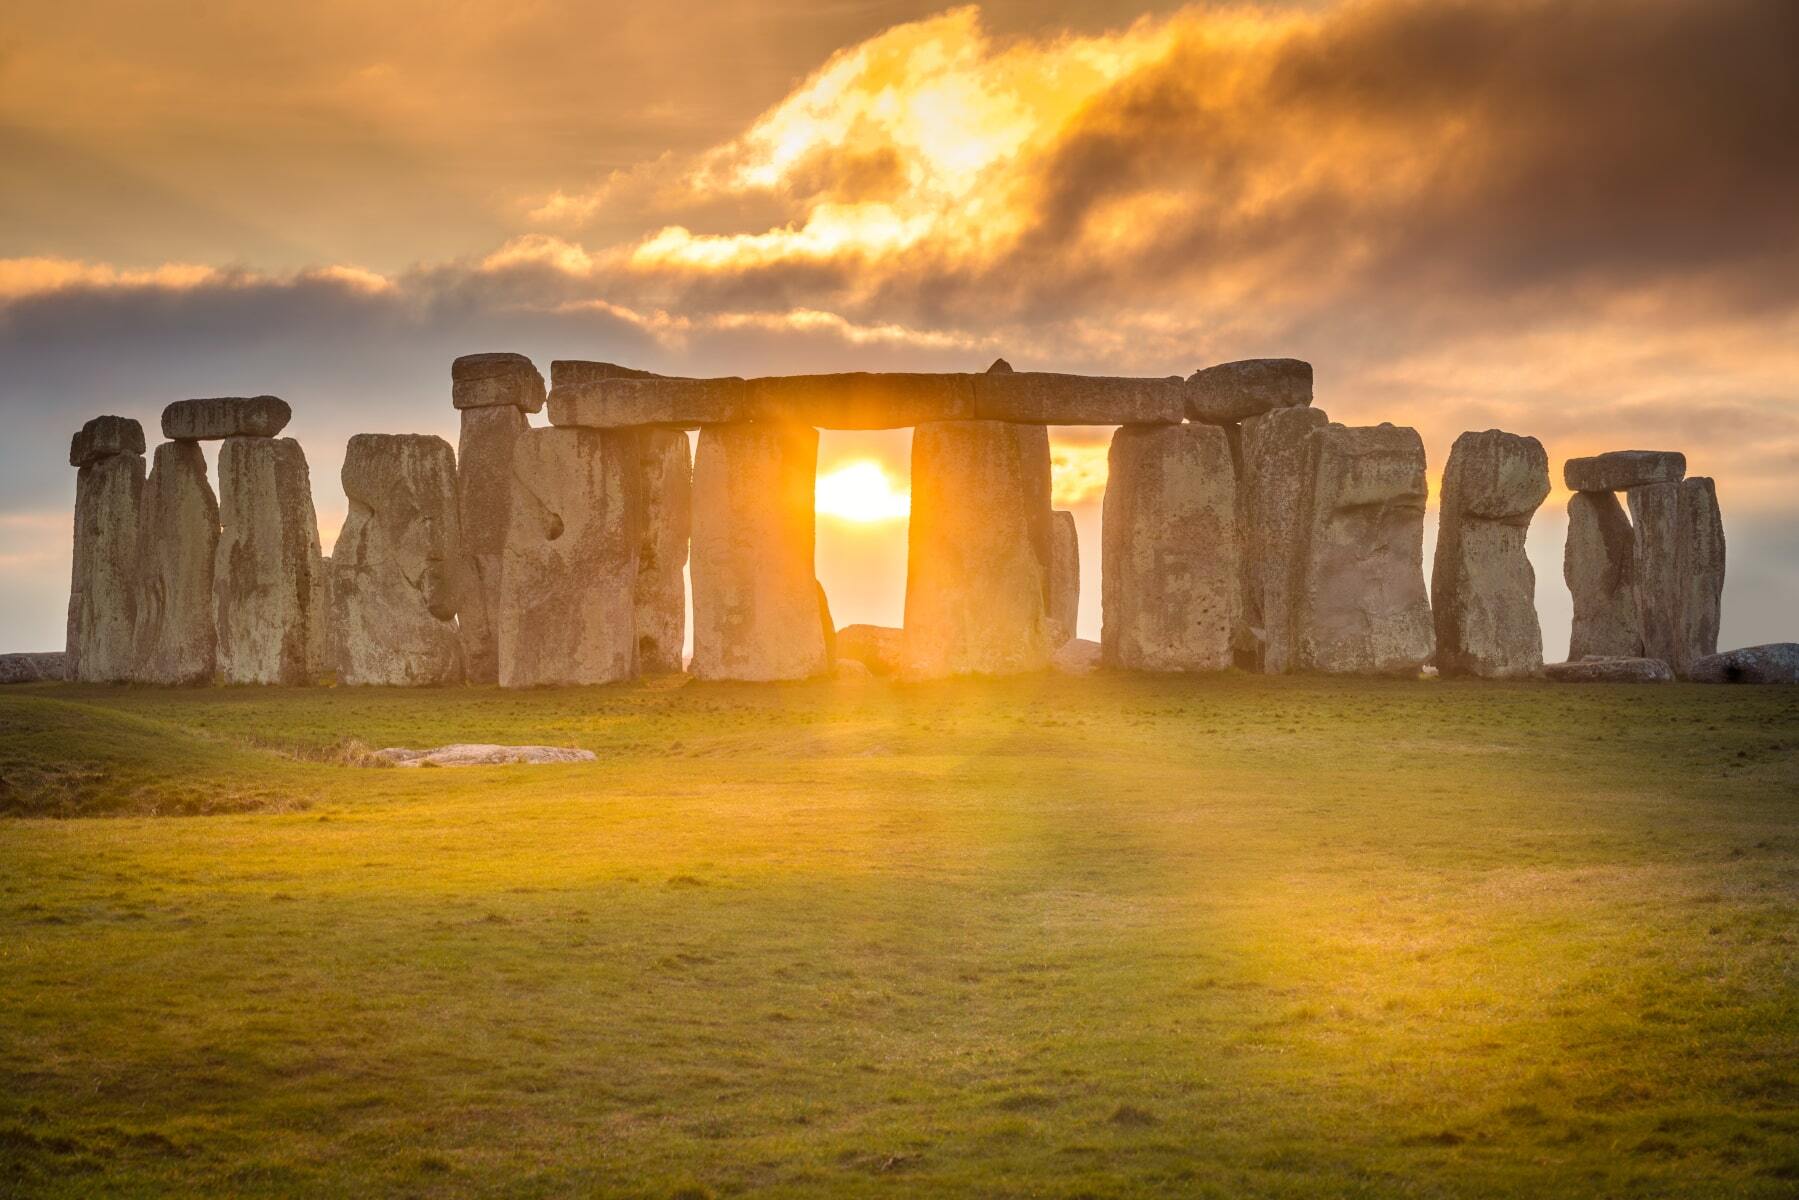 <p>One of the oldest World Heritage Sites on the planet, <a href="https://www.english-heritage.org.uk/visit/places/stonehenge/things-to-do/solstice/" class="atom_link atom_valid" rel="noreferrer noopener">Stonehenge</a> has been a place of pilgrimage for more than 4,500 years. This circle of mythical menhirs is the stuff of legend. It attracts major crowds every year, especially during the summer solstice, when the sun rises directly in the centre of the monument.</p>